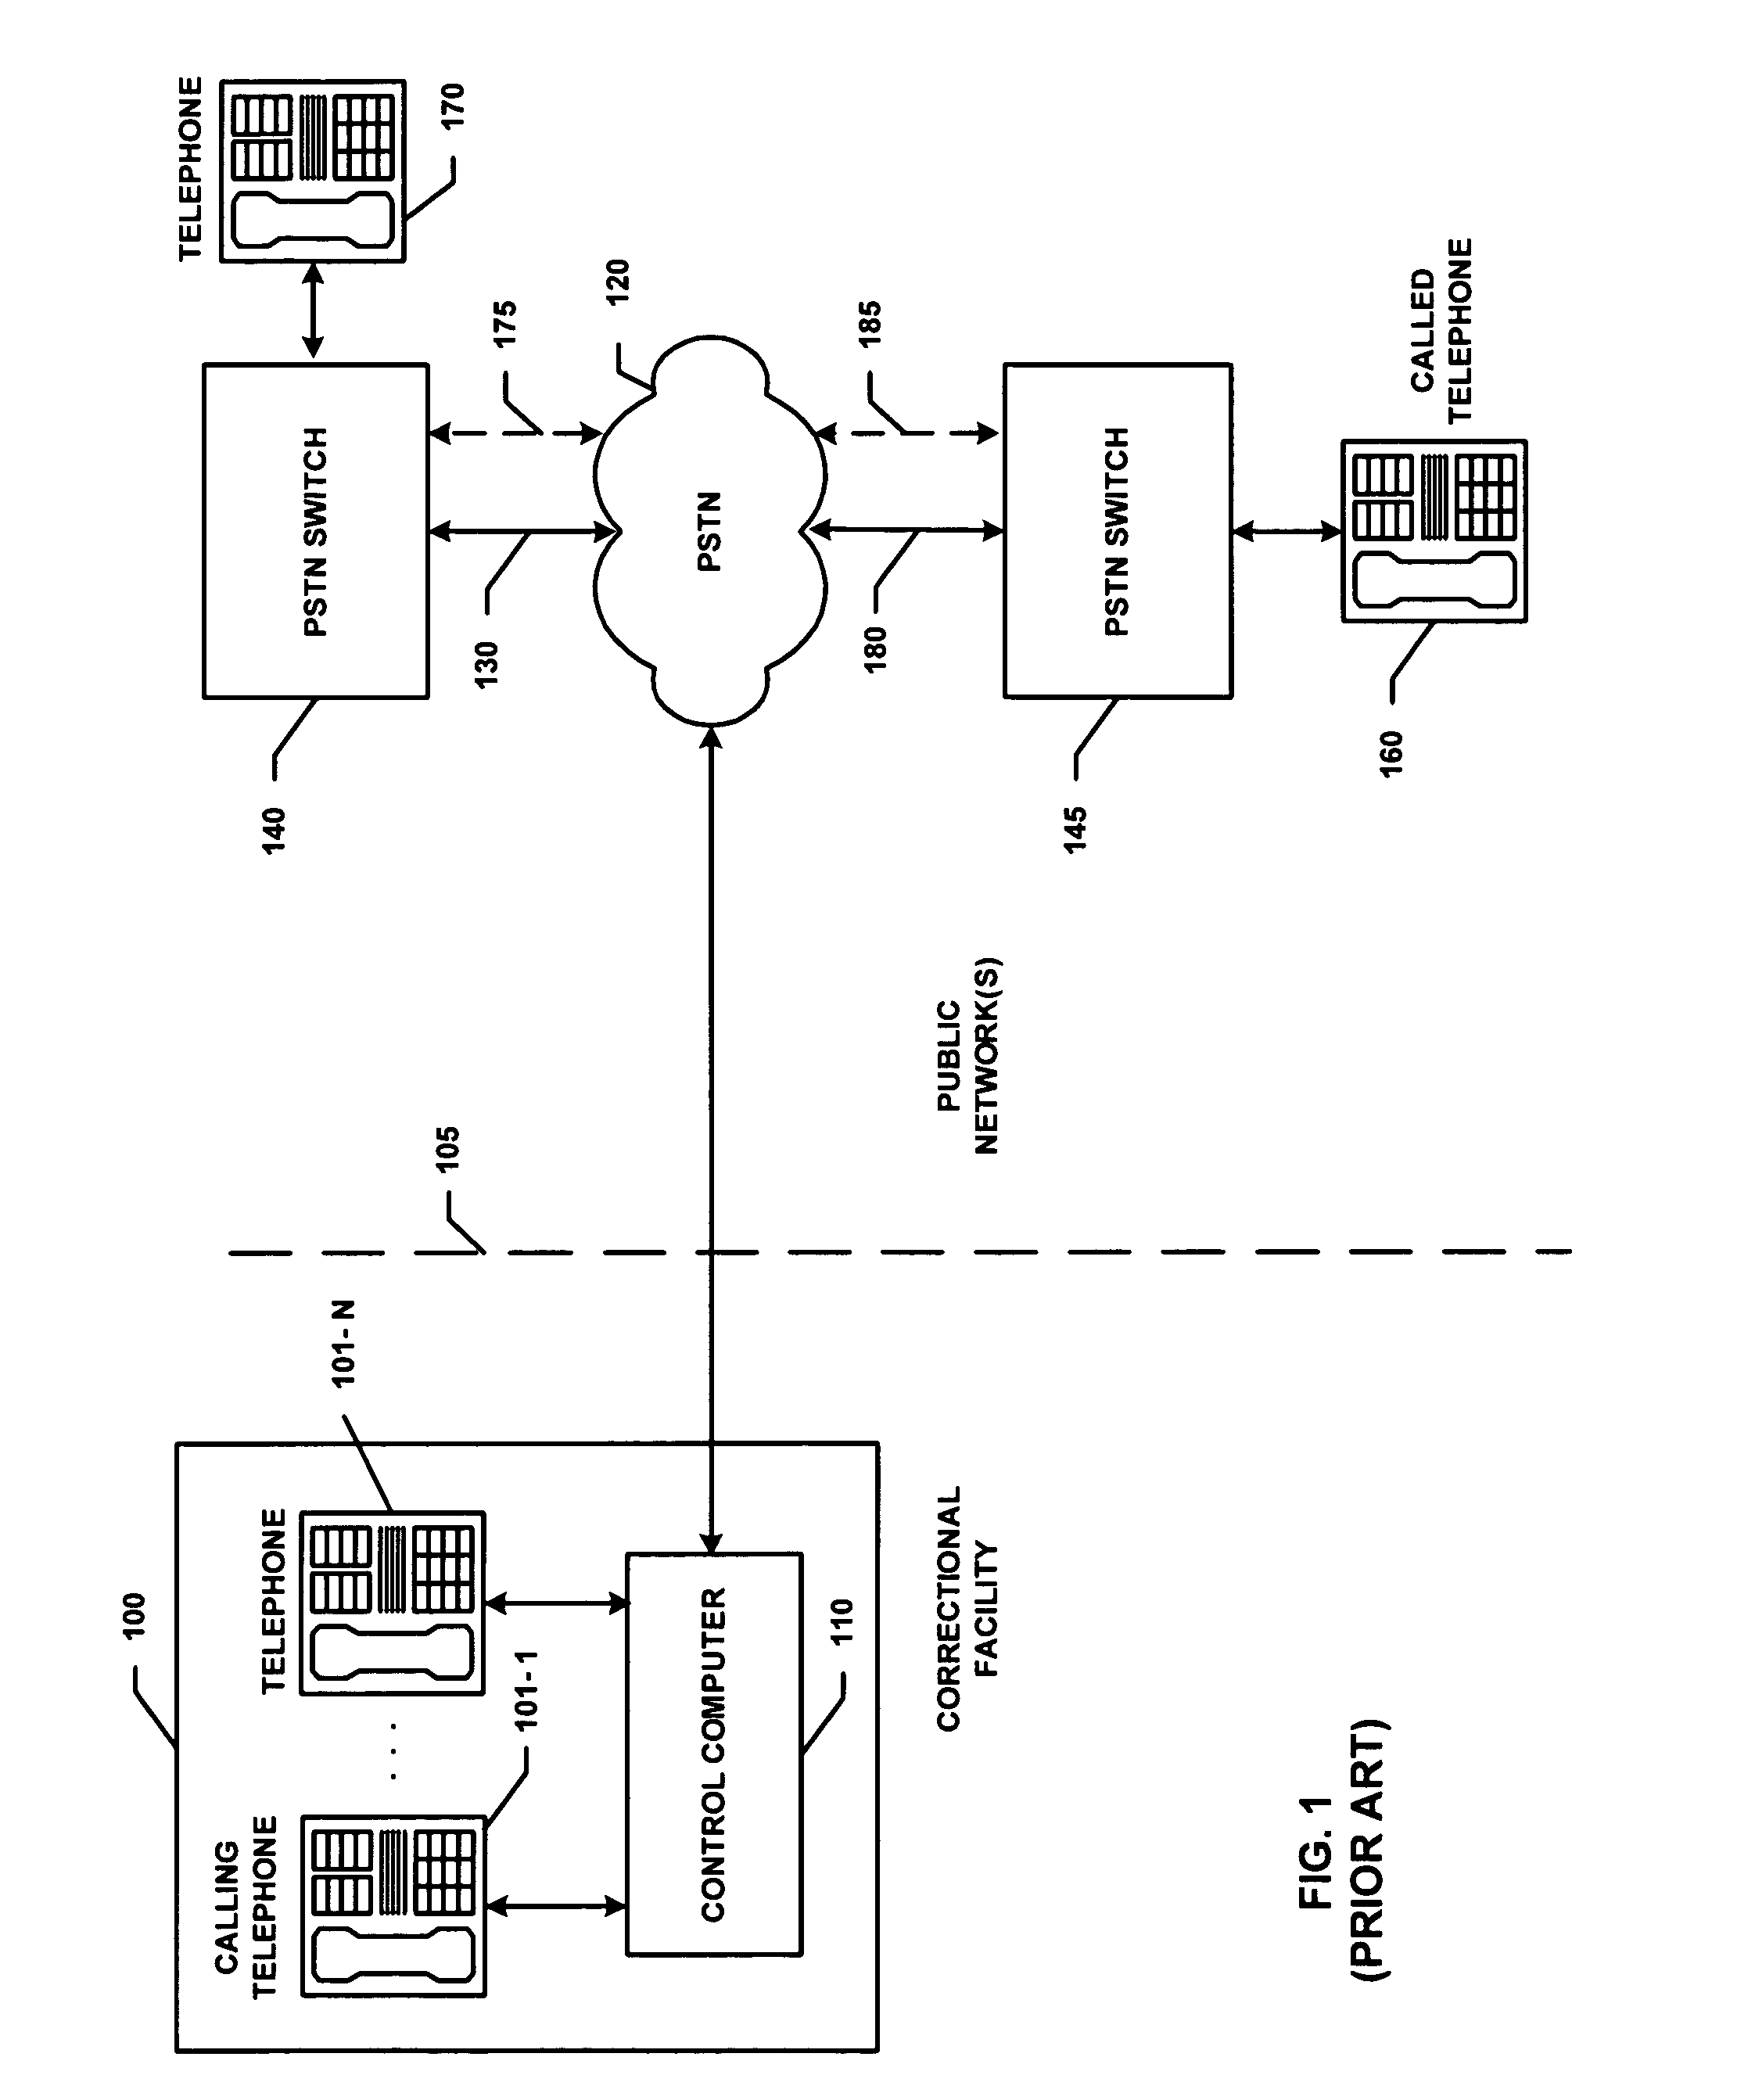 Telephony system and method with enhanced fraud control